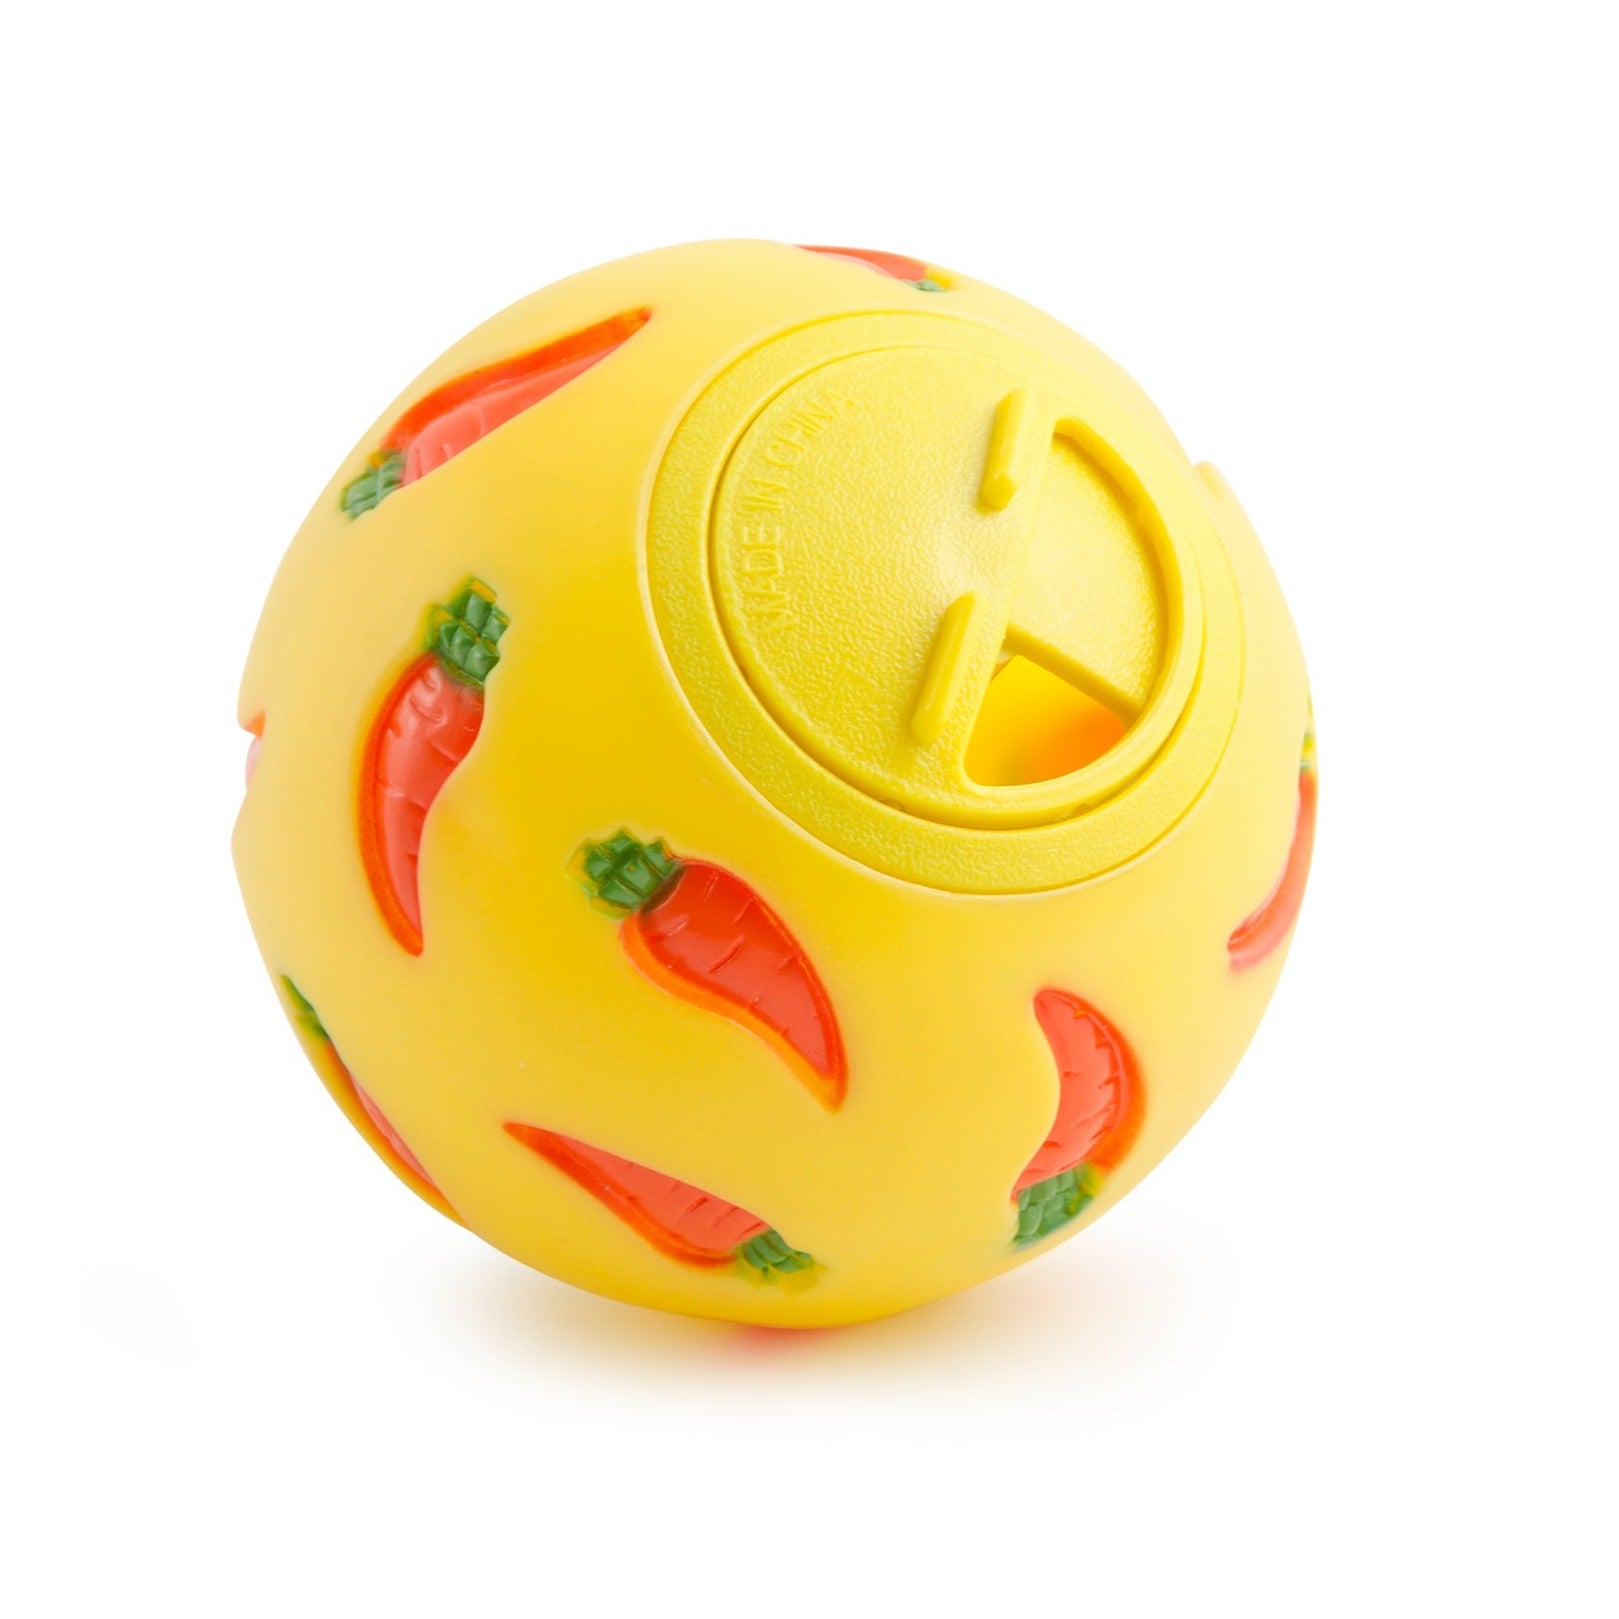 A bright yellow ball with a textured carrot pattern. Showcasing a circular opening mechanism that can be adjusted to allow for different sized treats to be placed inside.